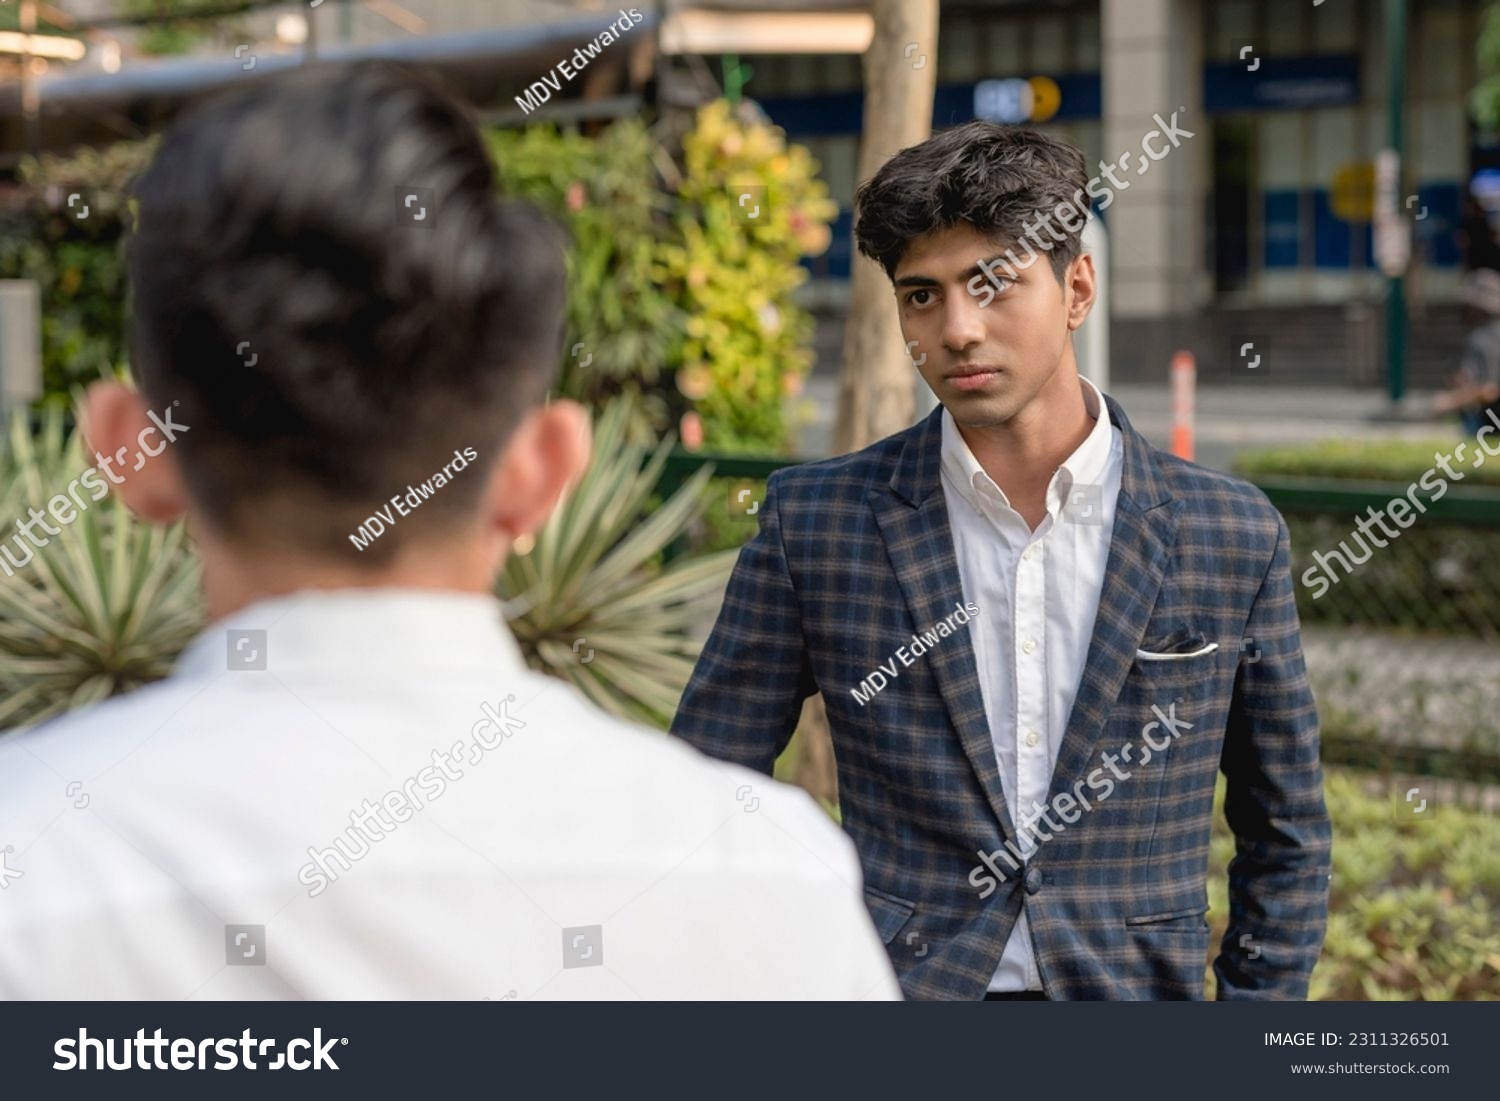 A hotheaded young indian man stares down his workmate while outside the office. Animosity in the workplace. #2311326501